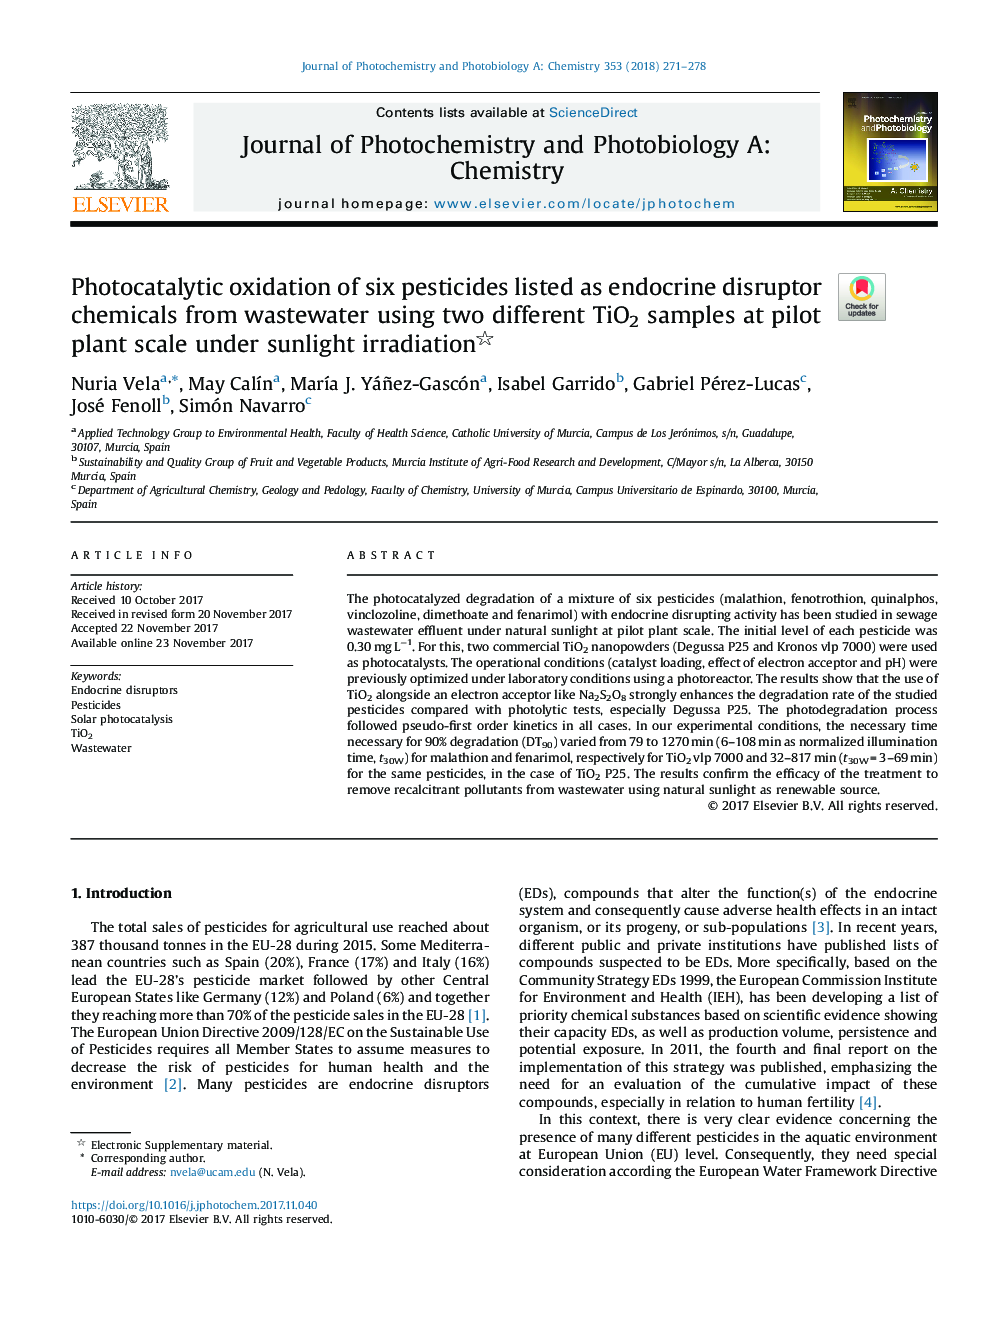 Photocatalytic oxidation of six pesticides listed as endocrine disruptor chemicals from wastewater using two different TiO2 samples at pilot plant scale under sunlight irradiation